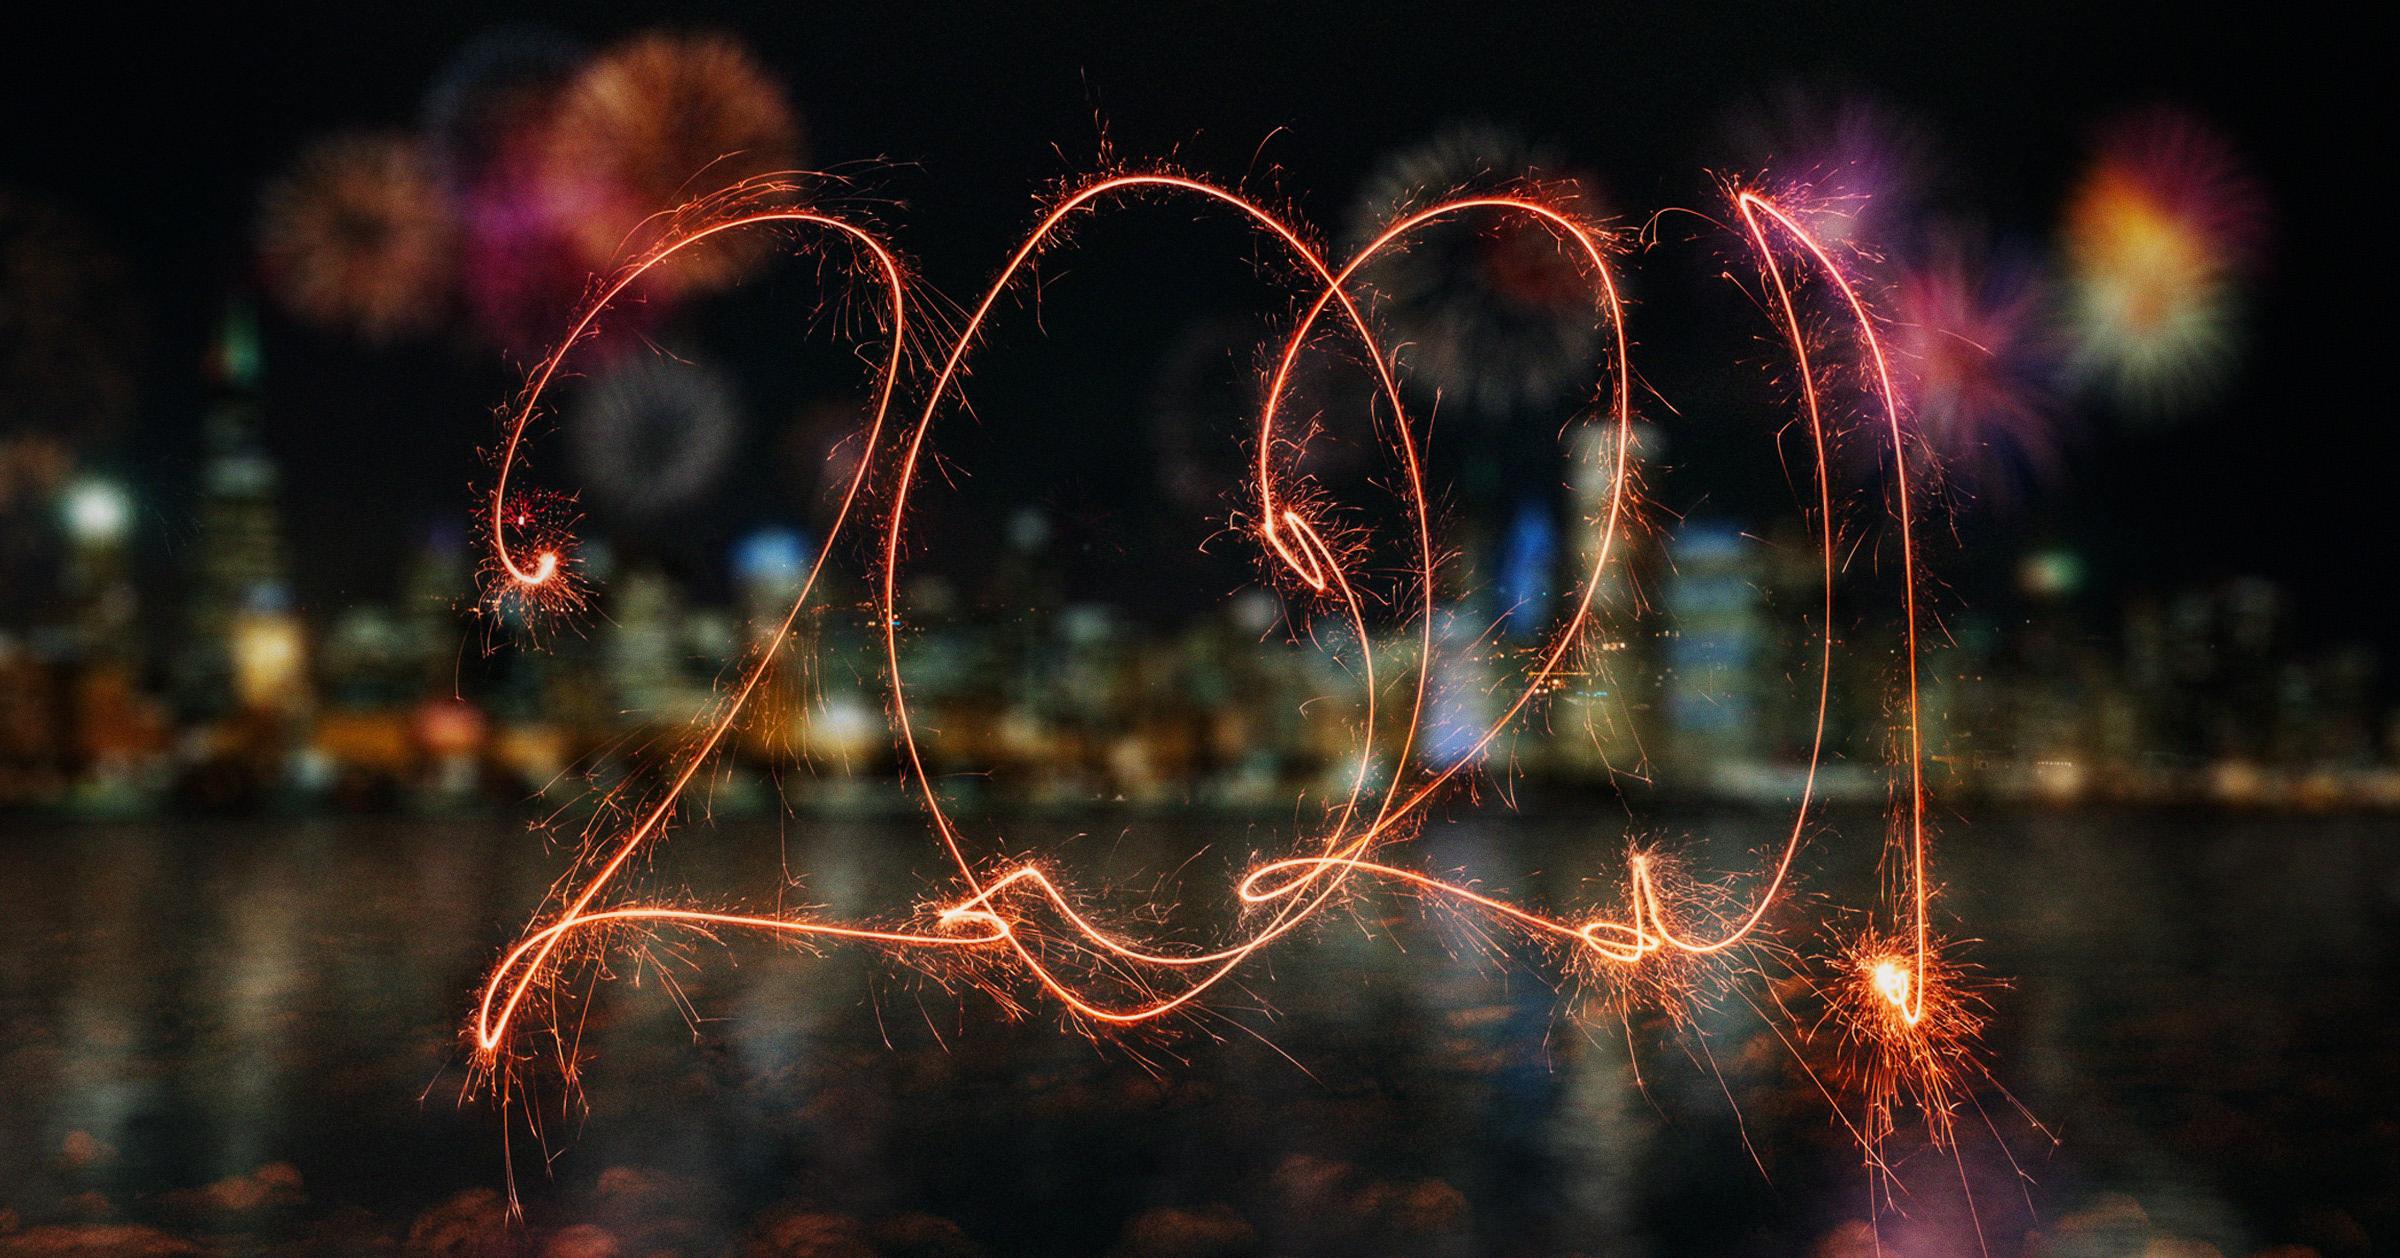 Fireworks spelling out the numbers "2021"